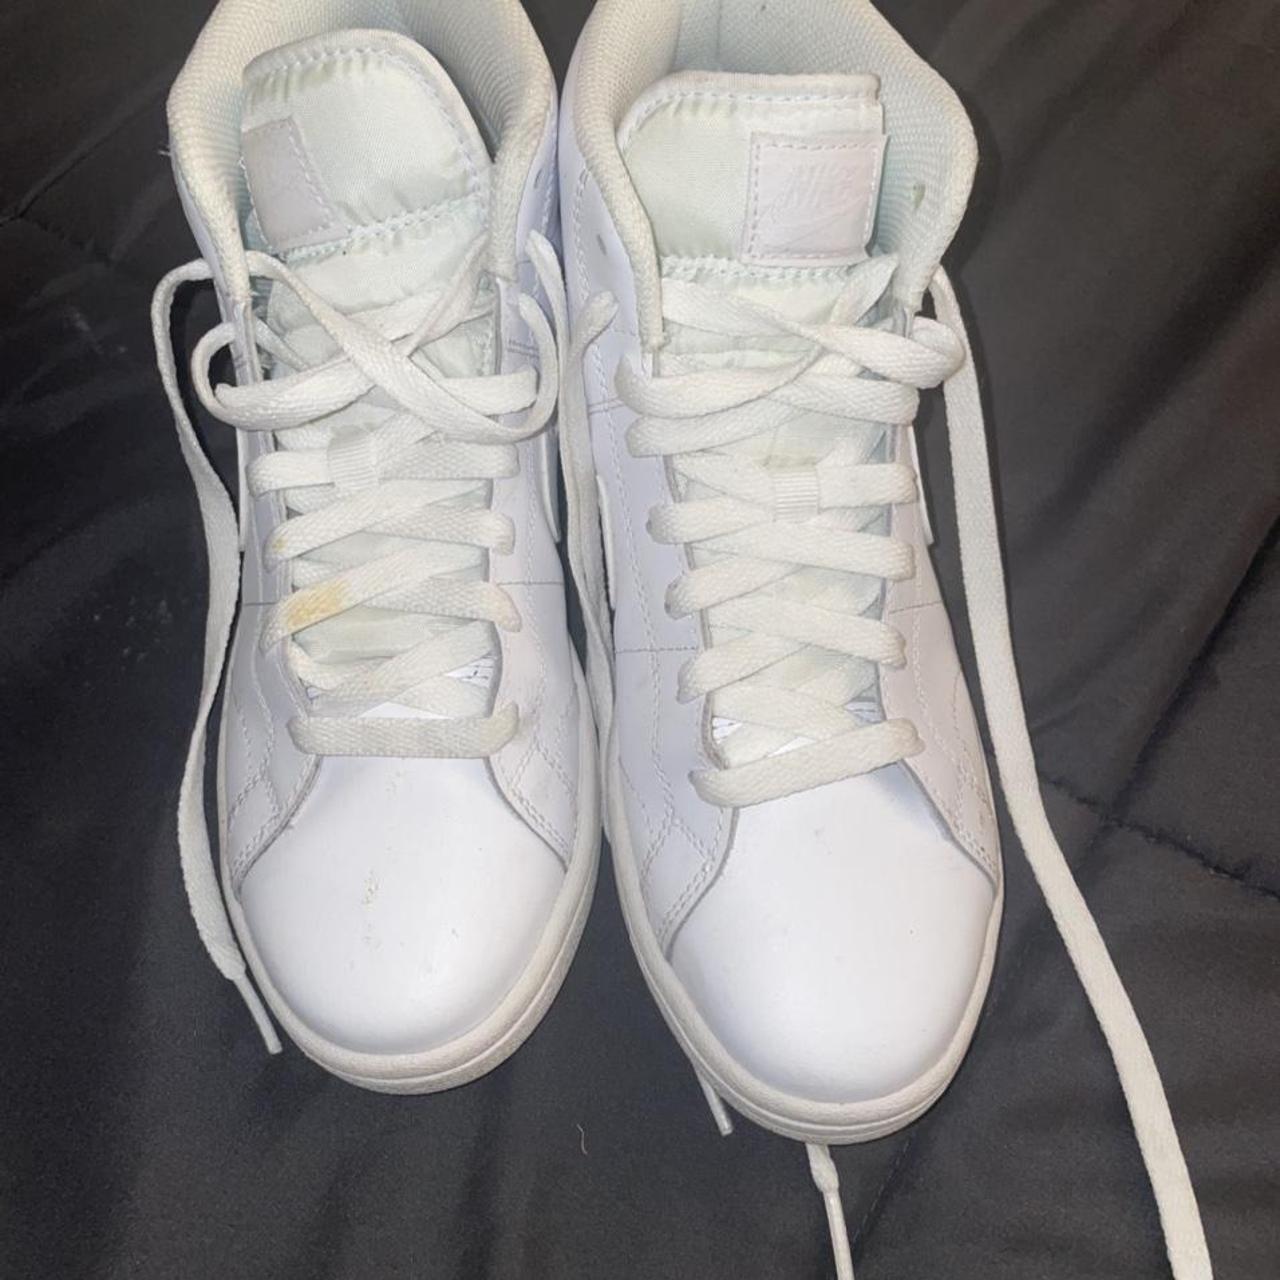 Womens Nike court royale 2 high top sneakers Size Depop